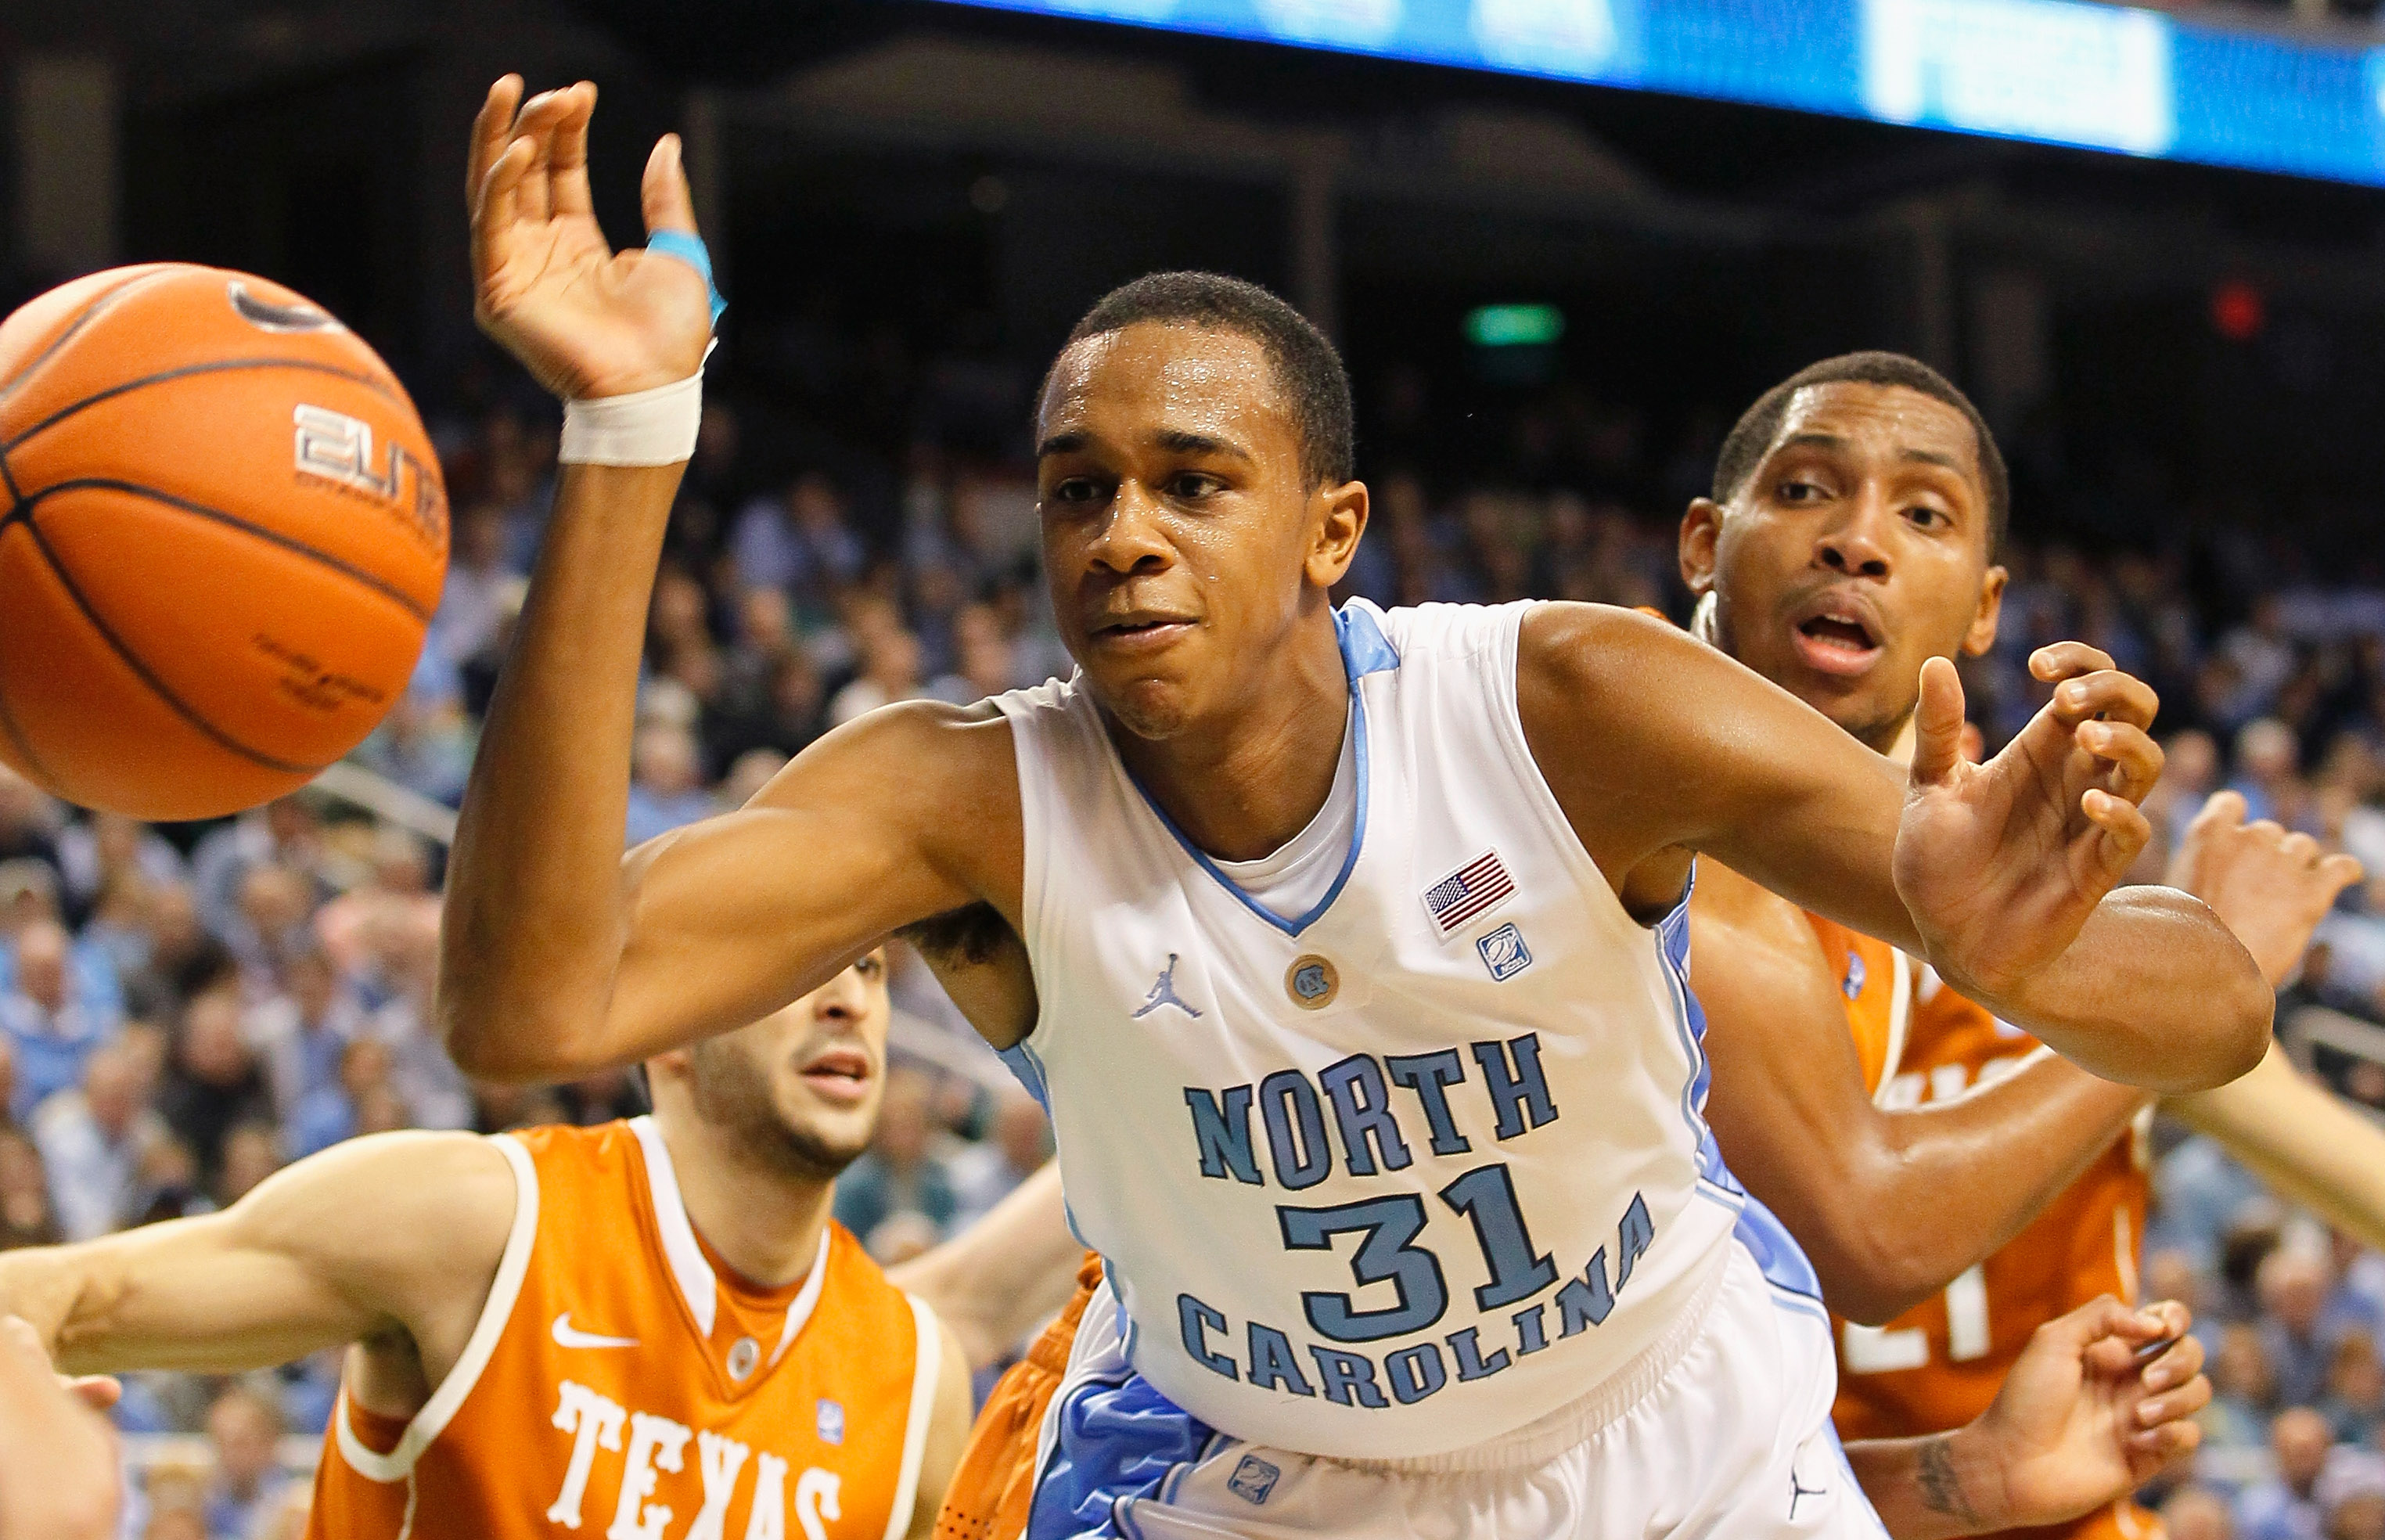 GREENSBORO, NC - DECEMBER 18:  John Henson #31 of the North Carolina Tar Heels has the ball stripped by Gary Johnson #1 of the Texas Longhorns at Greensboro Coliseum on December 18, 2010 in Greensboro, North Carolina.  (Photo by Kevin C. Cox/Getty Images)